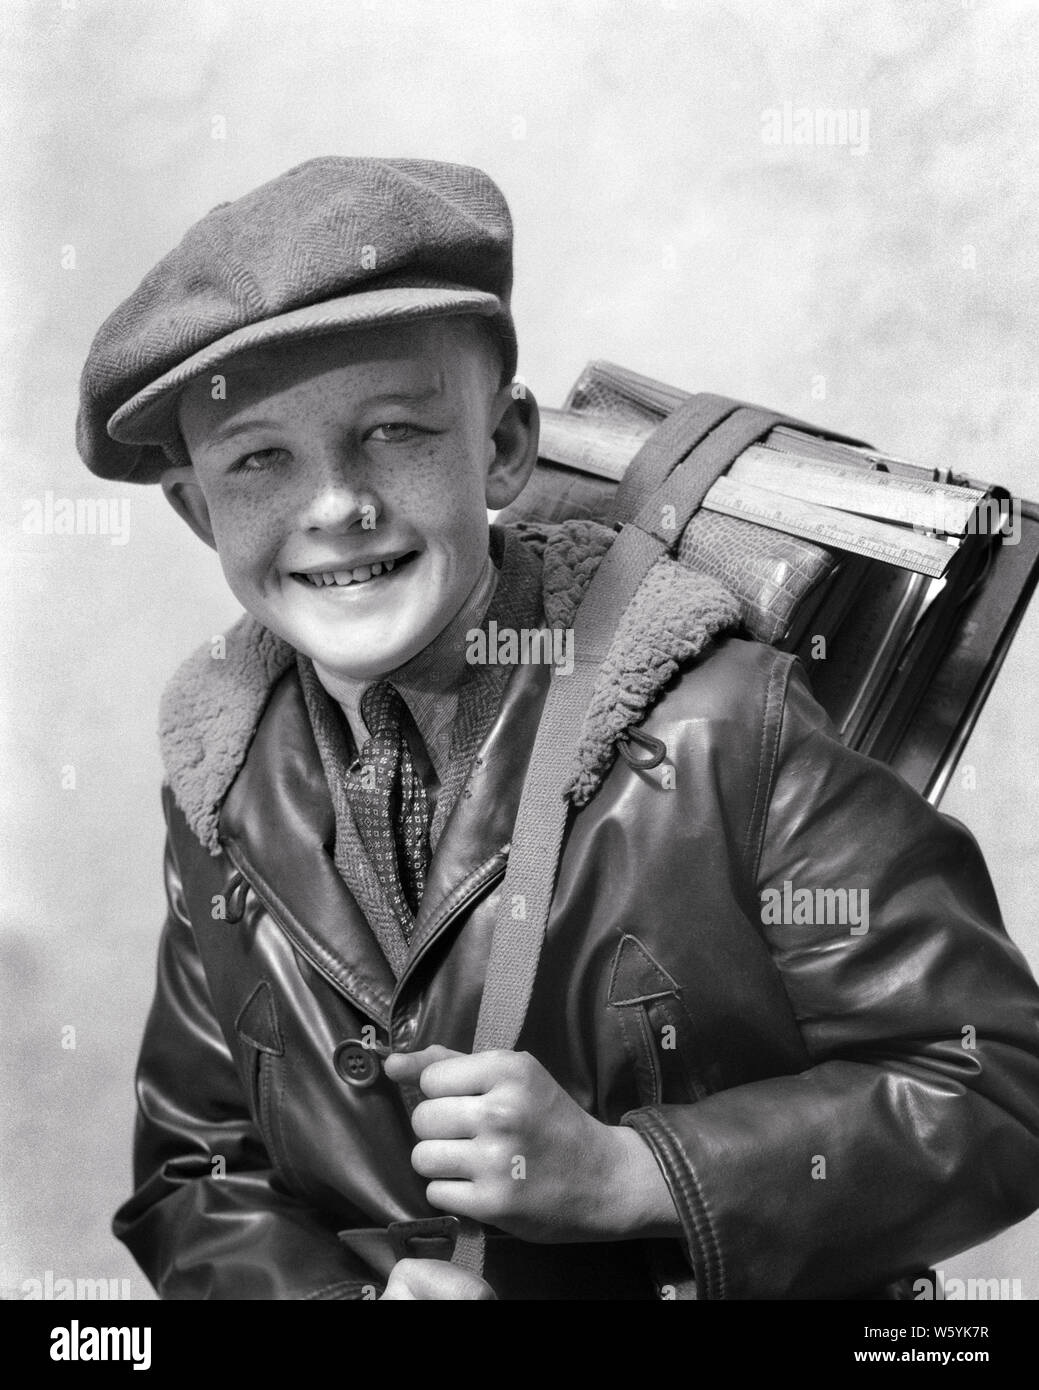 1920s 1930s SMILING PRETEEN BOY WEARING WOOL NEWSBOY CAP LEATHER BOMBER JACKET NECKTIE LOOKING AT CAMERA HOLDING BOOK STRAP - b10161 HAR001 HARS FACIAL BALANCE PLEASED JOY LIFESTYLE SATISFACTION STUDIO SHOT HEALTHINESS UNITED STATES WOOL HALF-LENGTH CLOTH INSPIRATION UNITED STATES OF AMERICA MALES FRECKLES SPIRITUALITY CONFIDENCE EXPRESSIONS B&W EYE CONTACT GOALS SCHOOLS SUCCESS DREAMS GRADE HAPPINESS BRIGHT CHEERFUL STRENGTH COURAGE CHOICE EXCITEMENT INTELLIGENT KNOWLEDGE DIRECTION PRIDE NECKTIE PRETEEN PRIMARY SHARP SMILES CONCEPTUAL IMAGINATION JOYFUL STYLISH NEWSBOY K-12 AGGRESSIVE EAGER Stock Photo